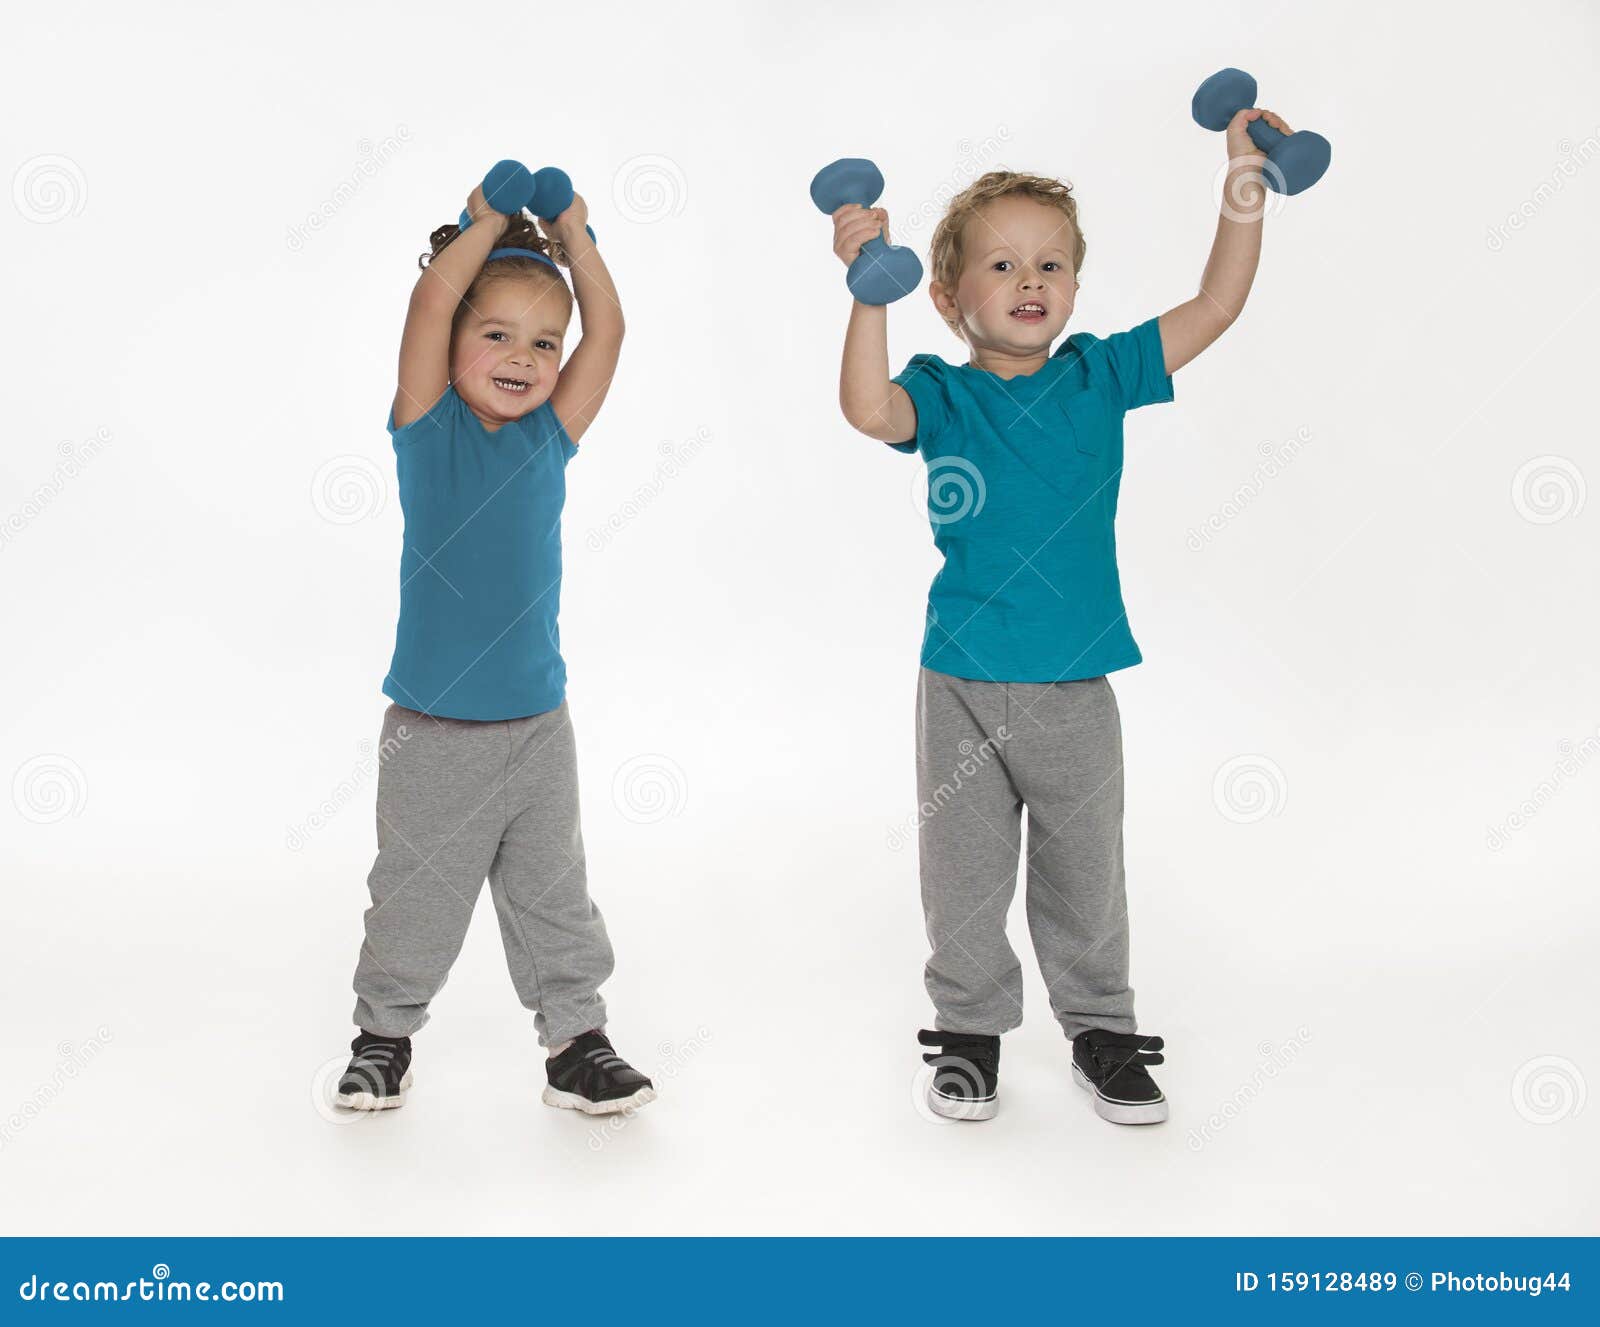 Little Kids Working Out With Weights Stock Image Image Of